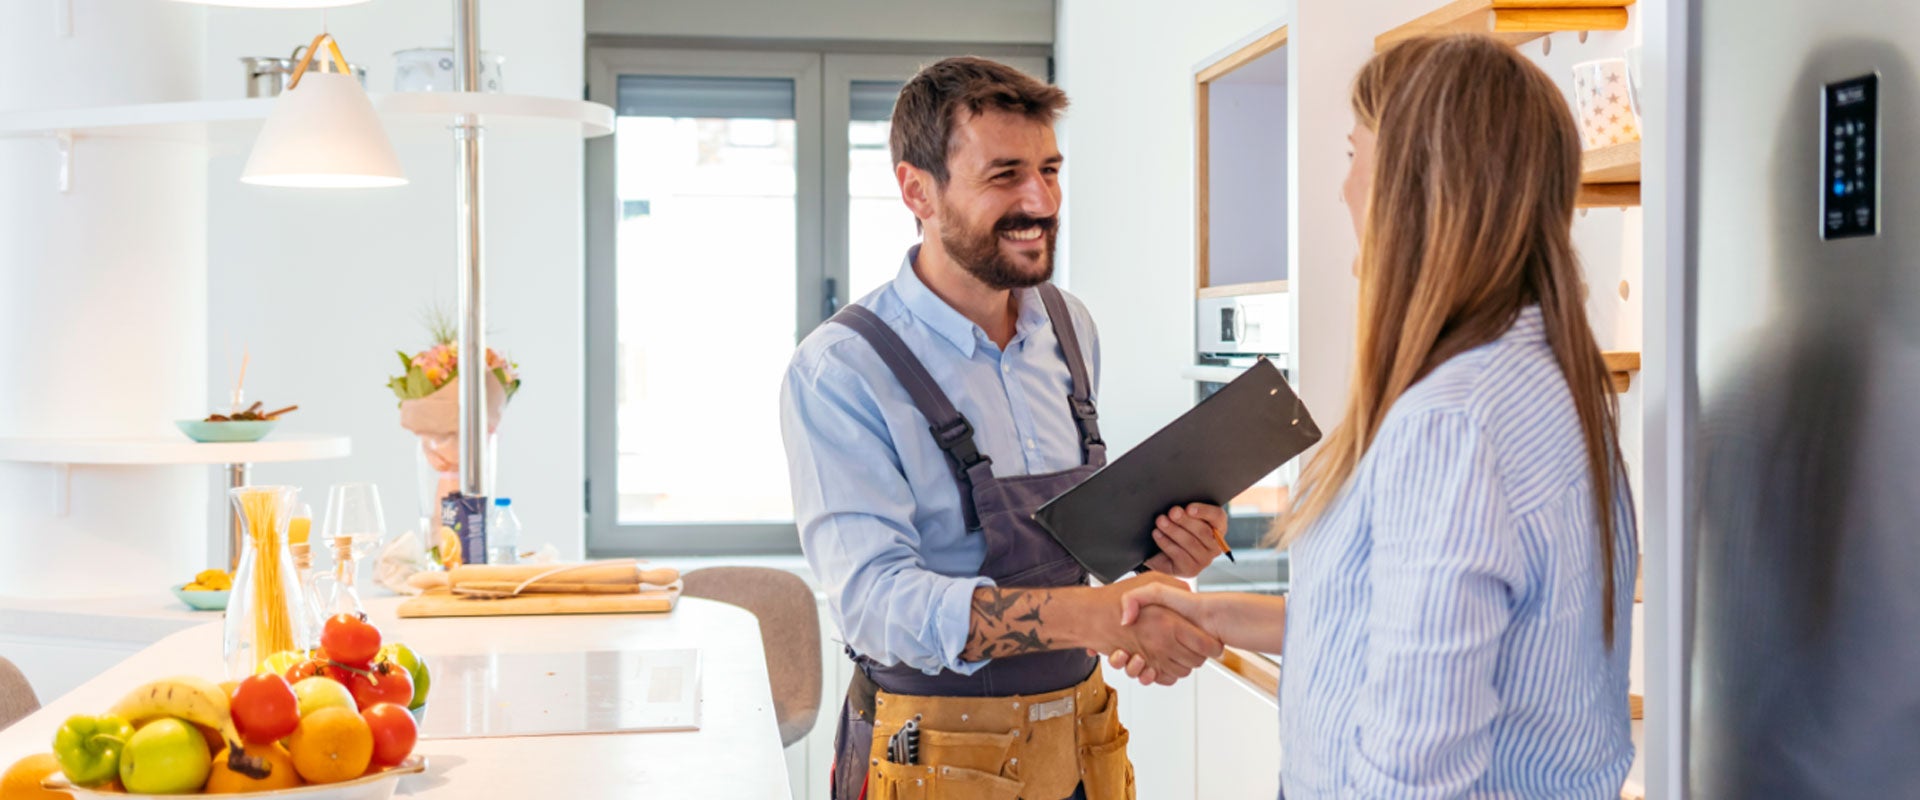 smiling contractor shaking hands with client